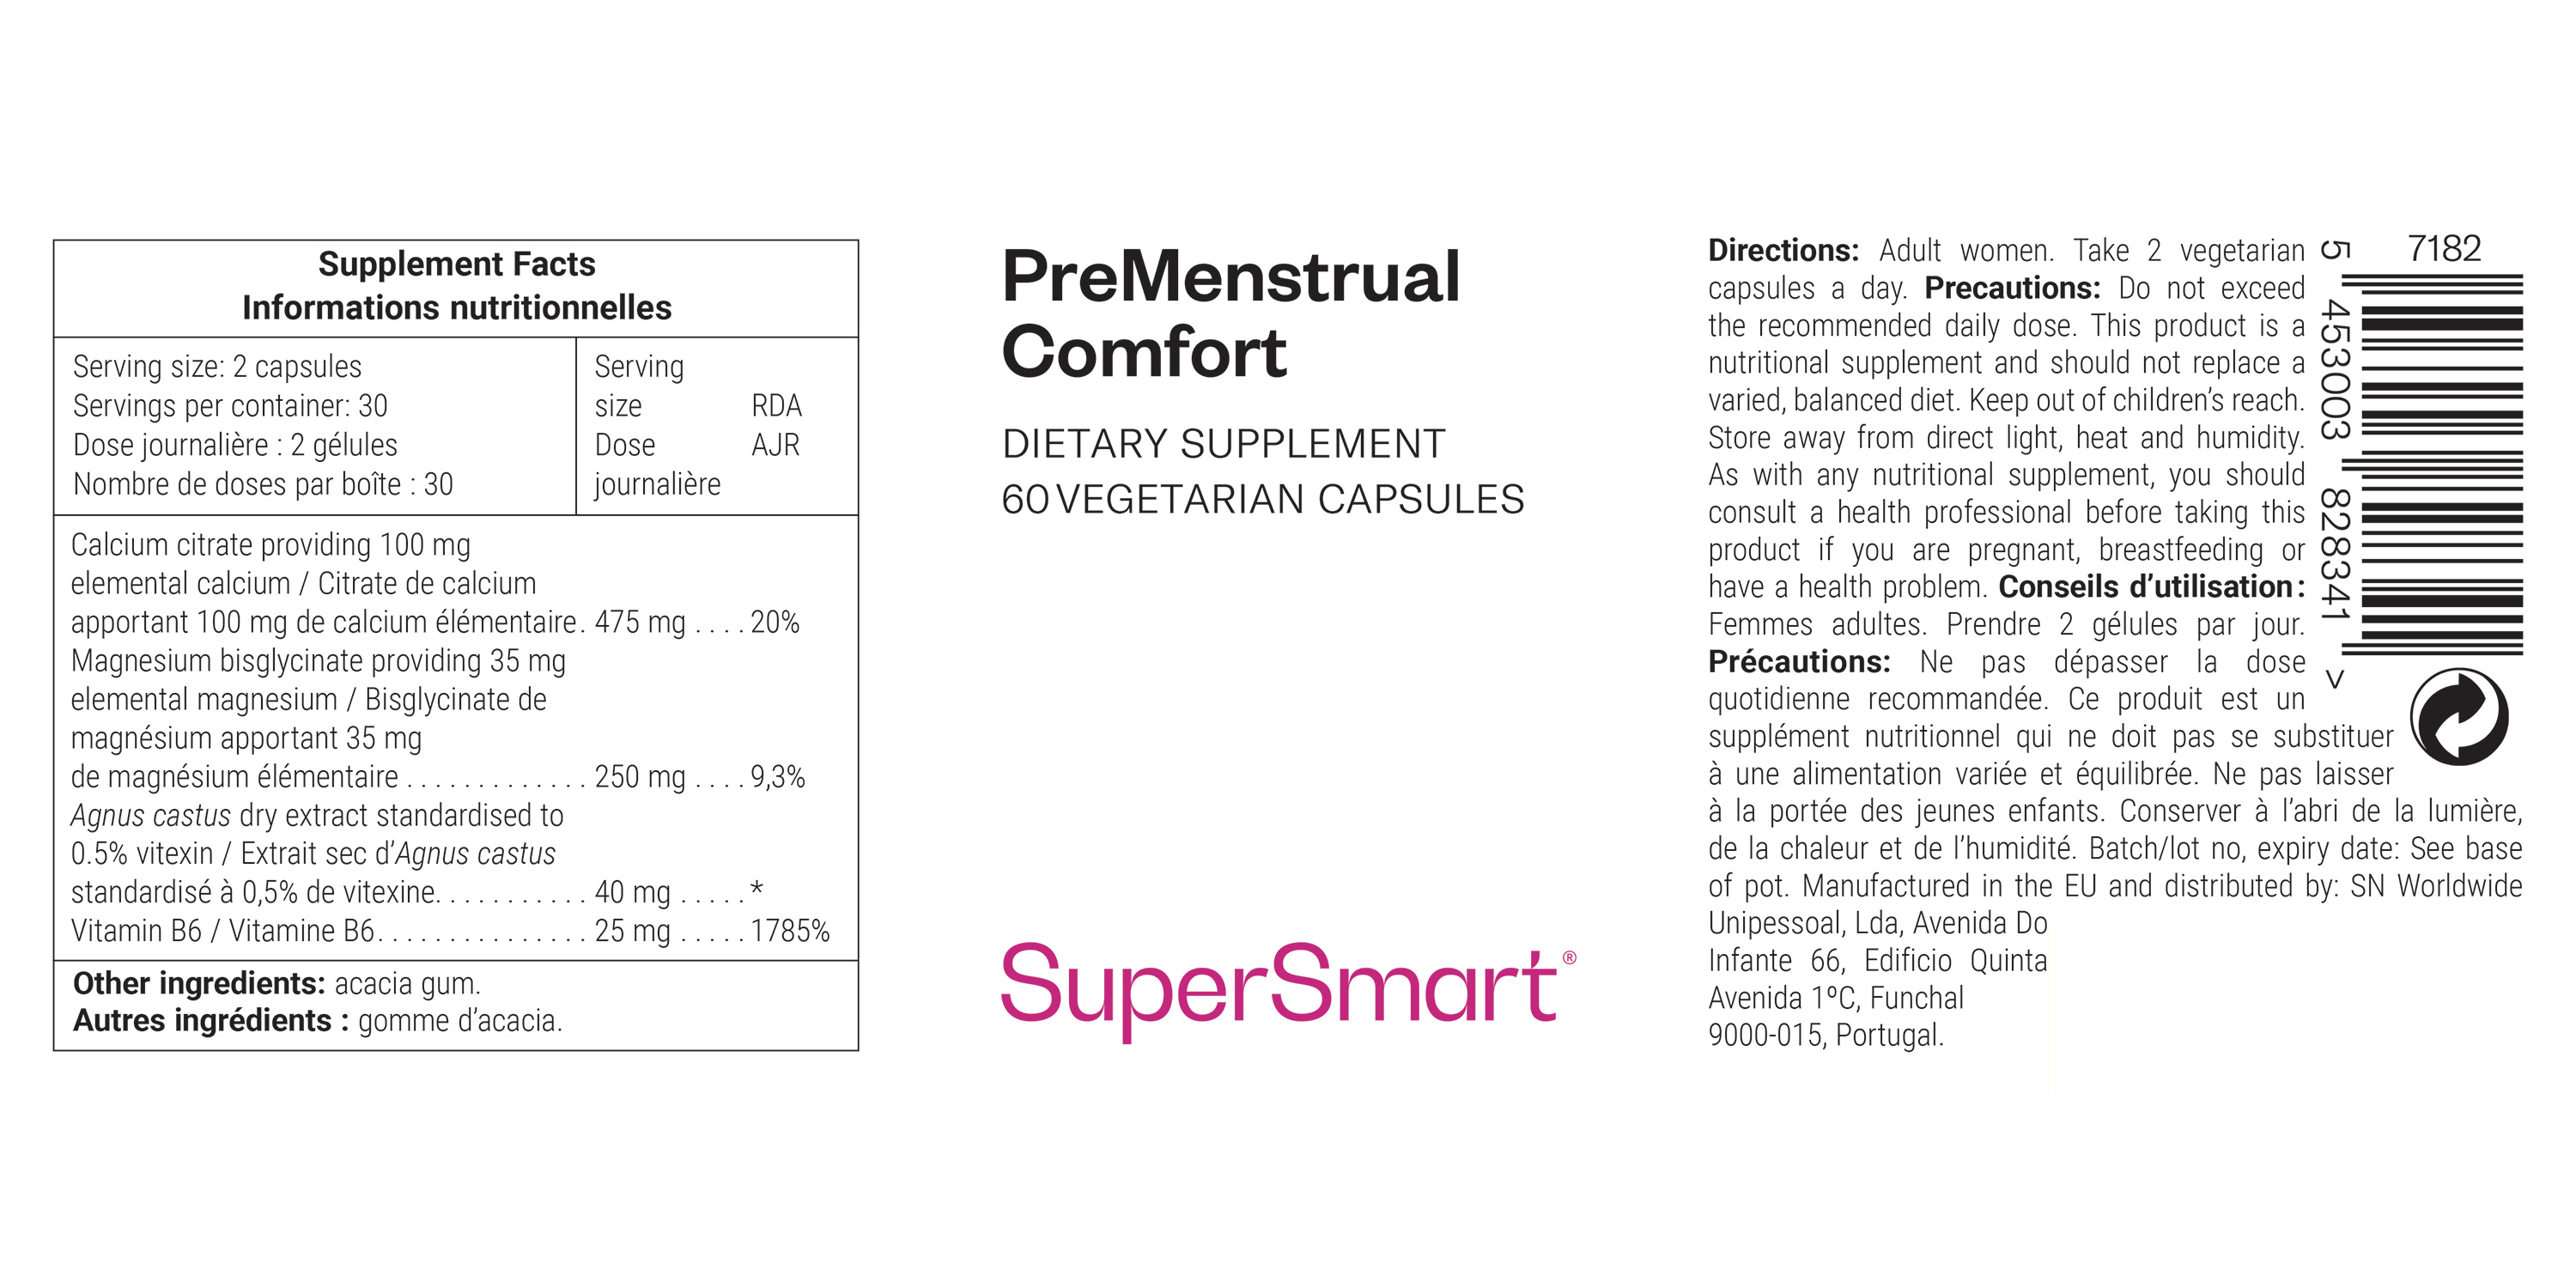 Dietary supplement for PMS